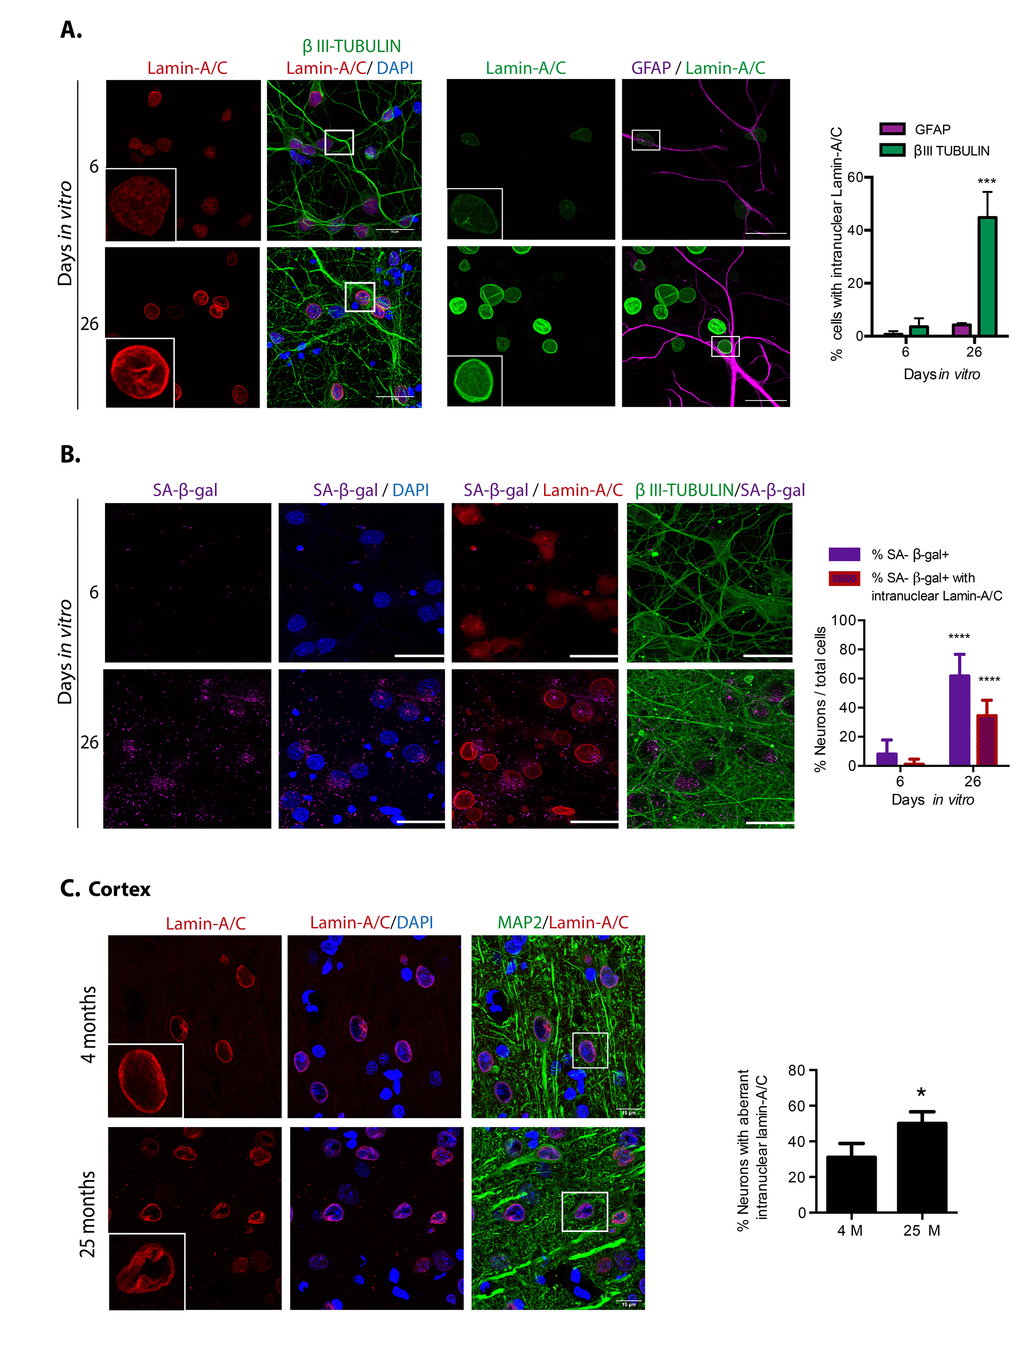 Cortical cells in long-term culture and in old rat brains had nuclear morphology abnormalities. (A) Immunofluorescence to detect Lamin-A/C in neurons (expressing βIII-TUBULIN) or astrocytes (expressing GFAP), in primary culture of cortical cells incubated during the indicated days in vitro. Squares indicate the magnified area shown in insets. Representative images of three independent experiments are shown. Scale bars represent 25 μm. Right, percentage of neurons or astrocytes with aberrant nuclear morphology over total cells. Bars represent SEM; two-way RM ANOVA analysis, *** pIV. (B) Simultaneous detection of SA-β-gal activity (by confocal microscopy) and Lamina-A/C (by immunofluorescence) in neurons (expressing βIII-TUBULIN) in primary culture of cortical cells incubated during the indicated days in vitro. Representative images of three independent experiments are shown. Scale bars represent 25 μm. Right, percentage of neurons with visible SA-β-gal activity, and with both visible SA-β-gal activity and aberrant intranuclear Lamin-A/C over total cells. Five fields from three independent experiments were quantified. Bars represent SEM. Two-way RM ANOVA analysis, followed by Sidak´s multiple comparison test. **** pIV. C. Immunofluorescence to detect Lamin-A/C in cortical neurons in the internal pyramidal layer 5 from brain slices of the indicated age. Notice that also in vivo, neurons in old brains had nuclear deformations. Squares indicate the magnified area shown in insets. Scale bars represent 30 μm. Right, percentage of neurons in with aberrant nuclear morphology in cortical brain slices of the indicated age, as shown in (C). (n=3). Bars represent SD; unpaired t Test Student * p